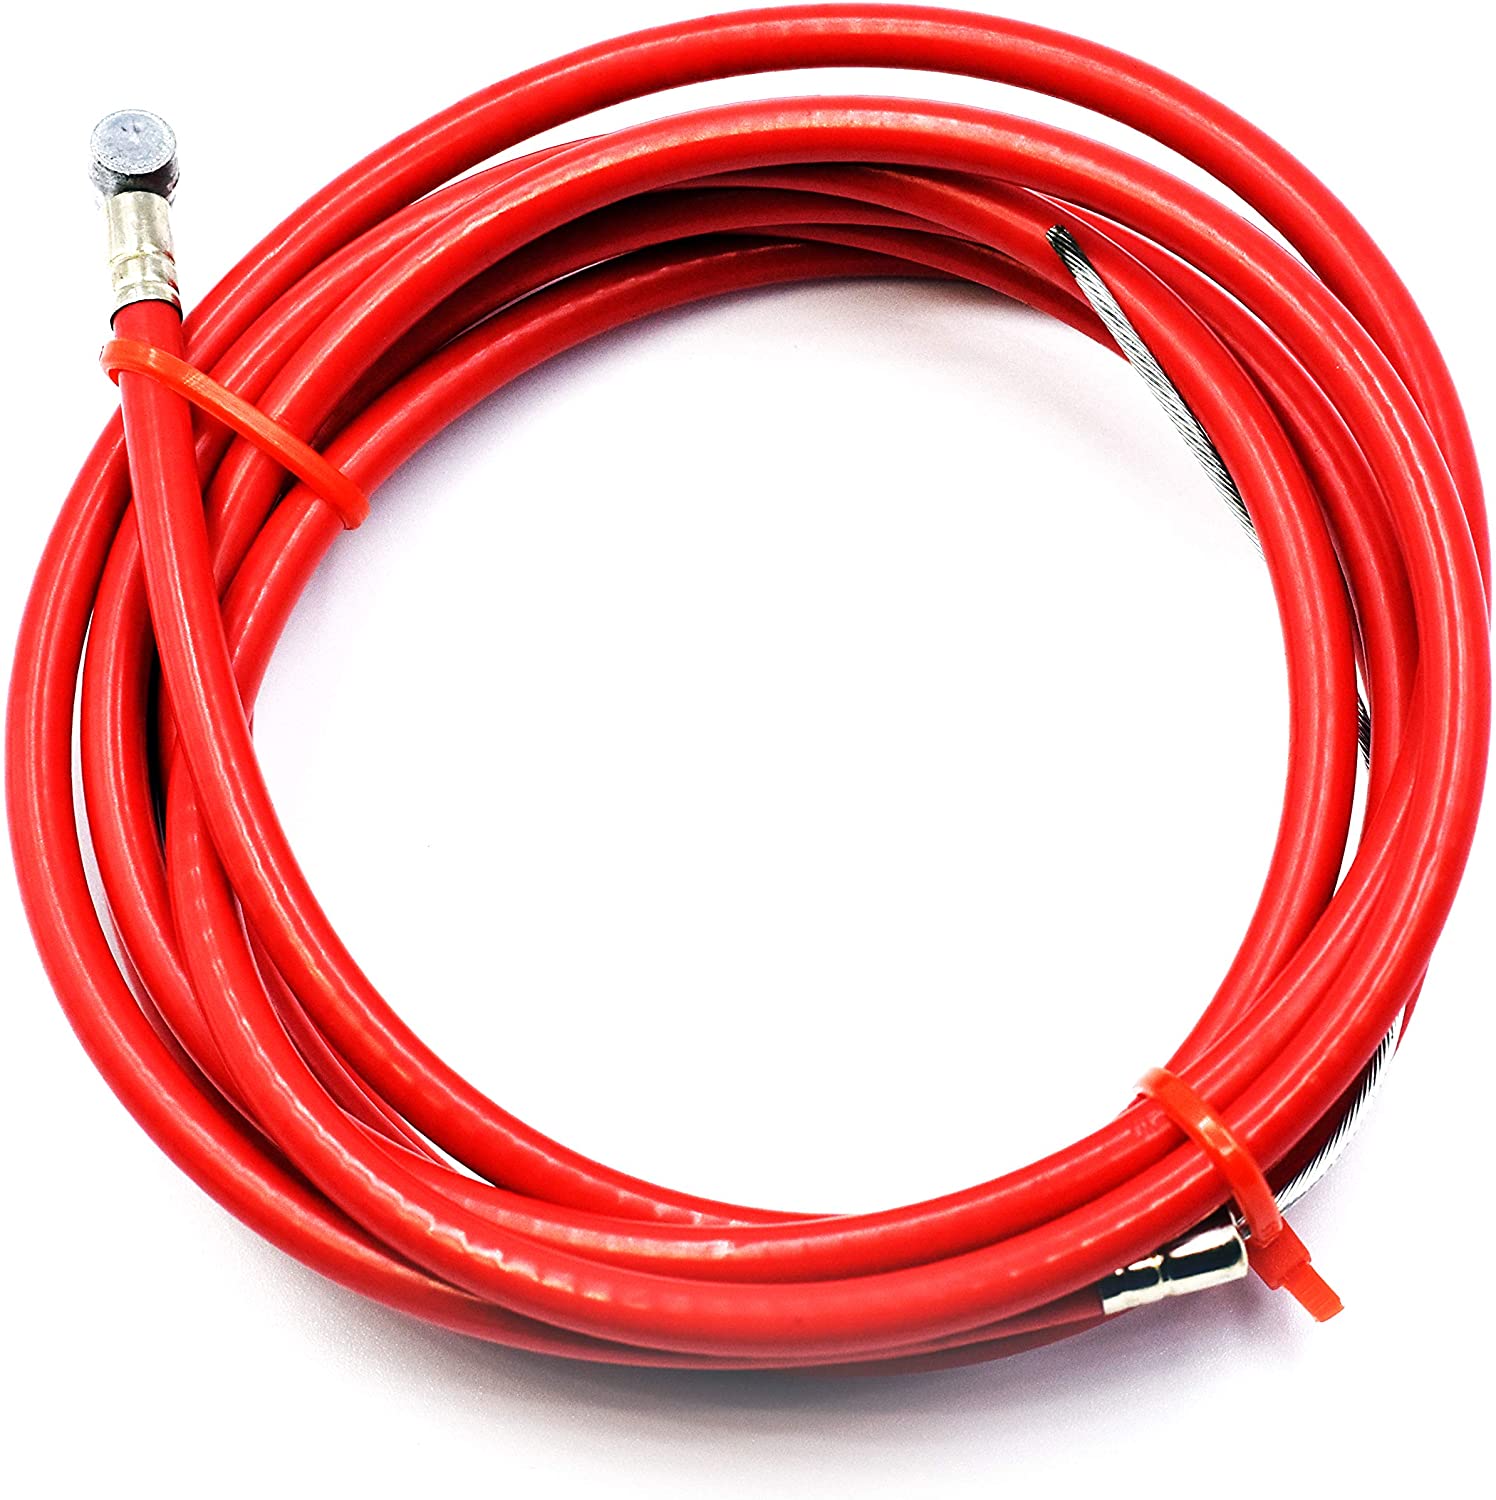 Brake Line Cable For Xiaomi M365 1S